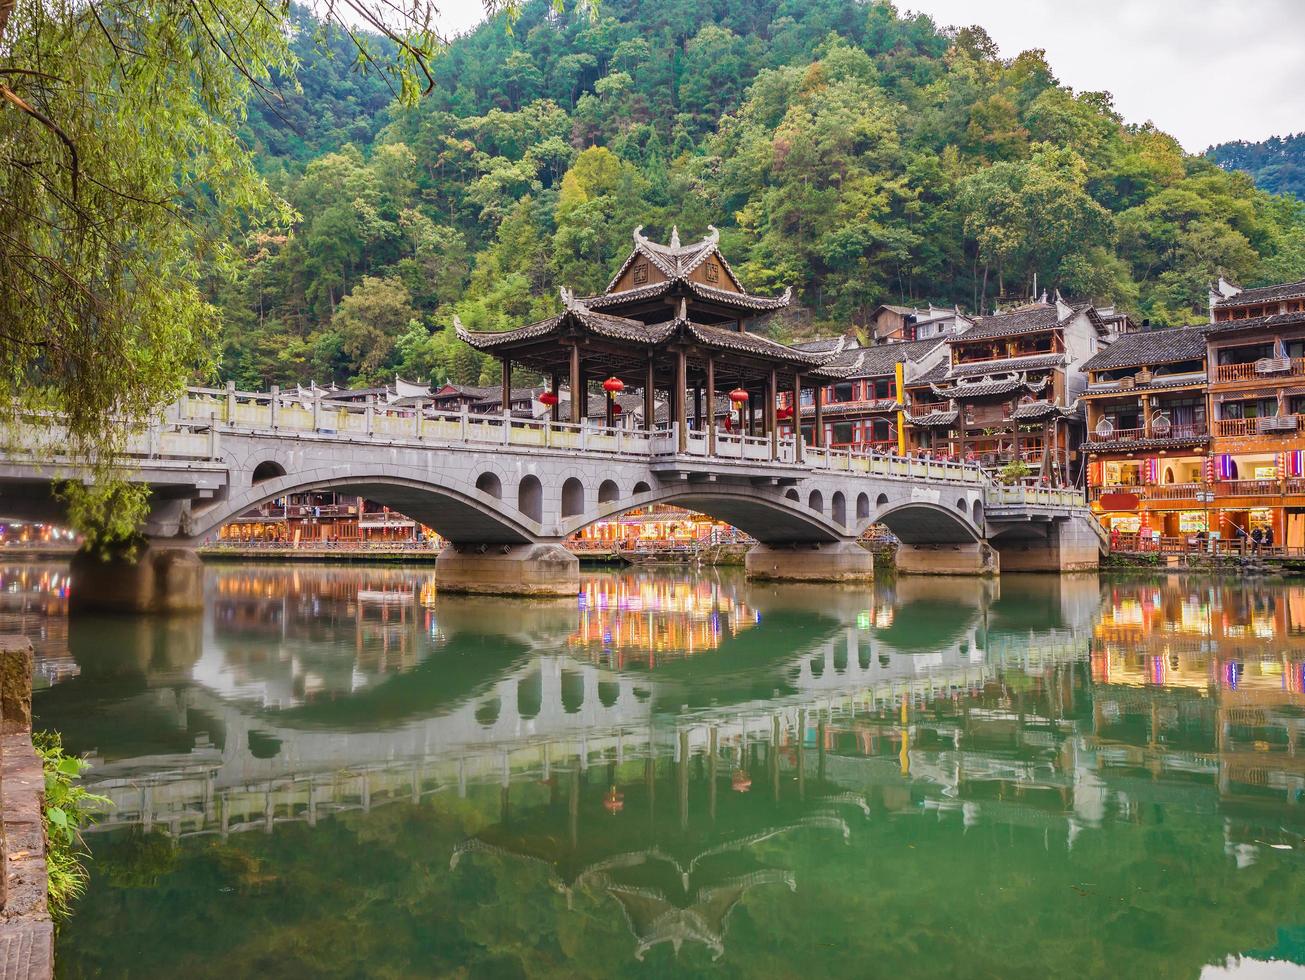 Fenghuang old town bridge with Scenery view of fenghuang old town .phoenix ancient town or Fenghuang County is a county of Hunan Province, China photo